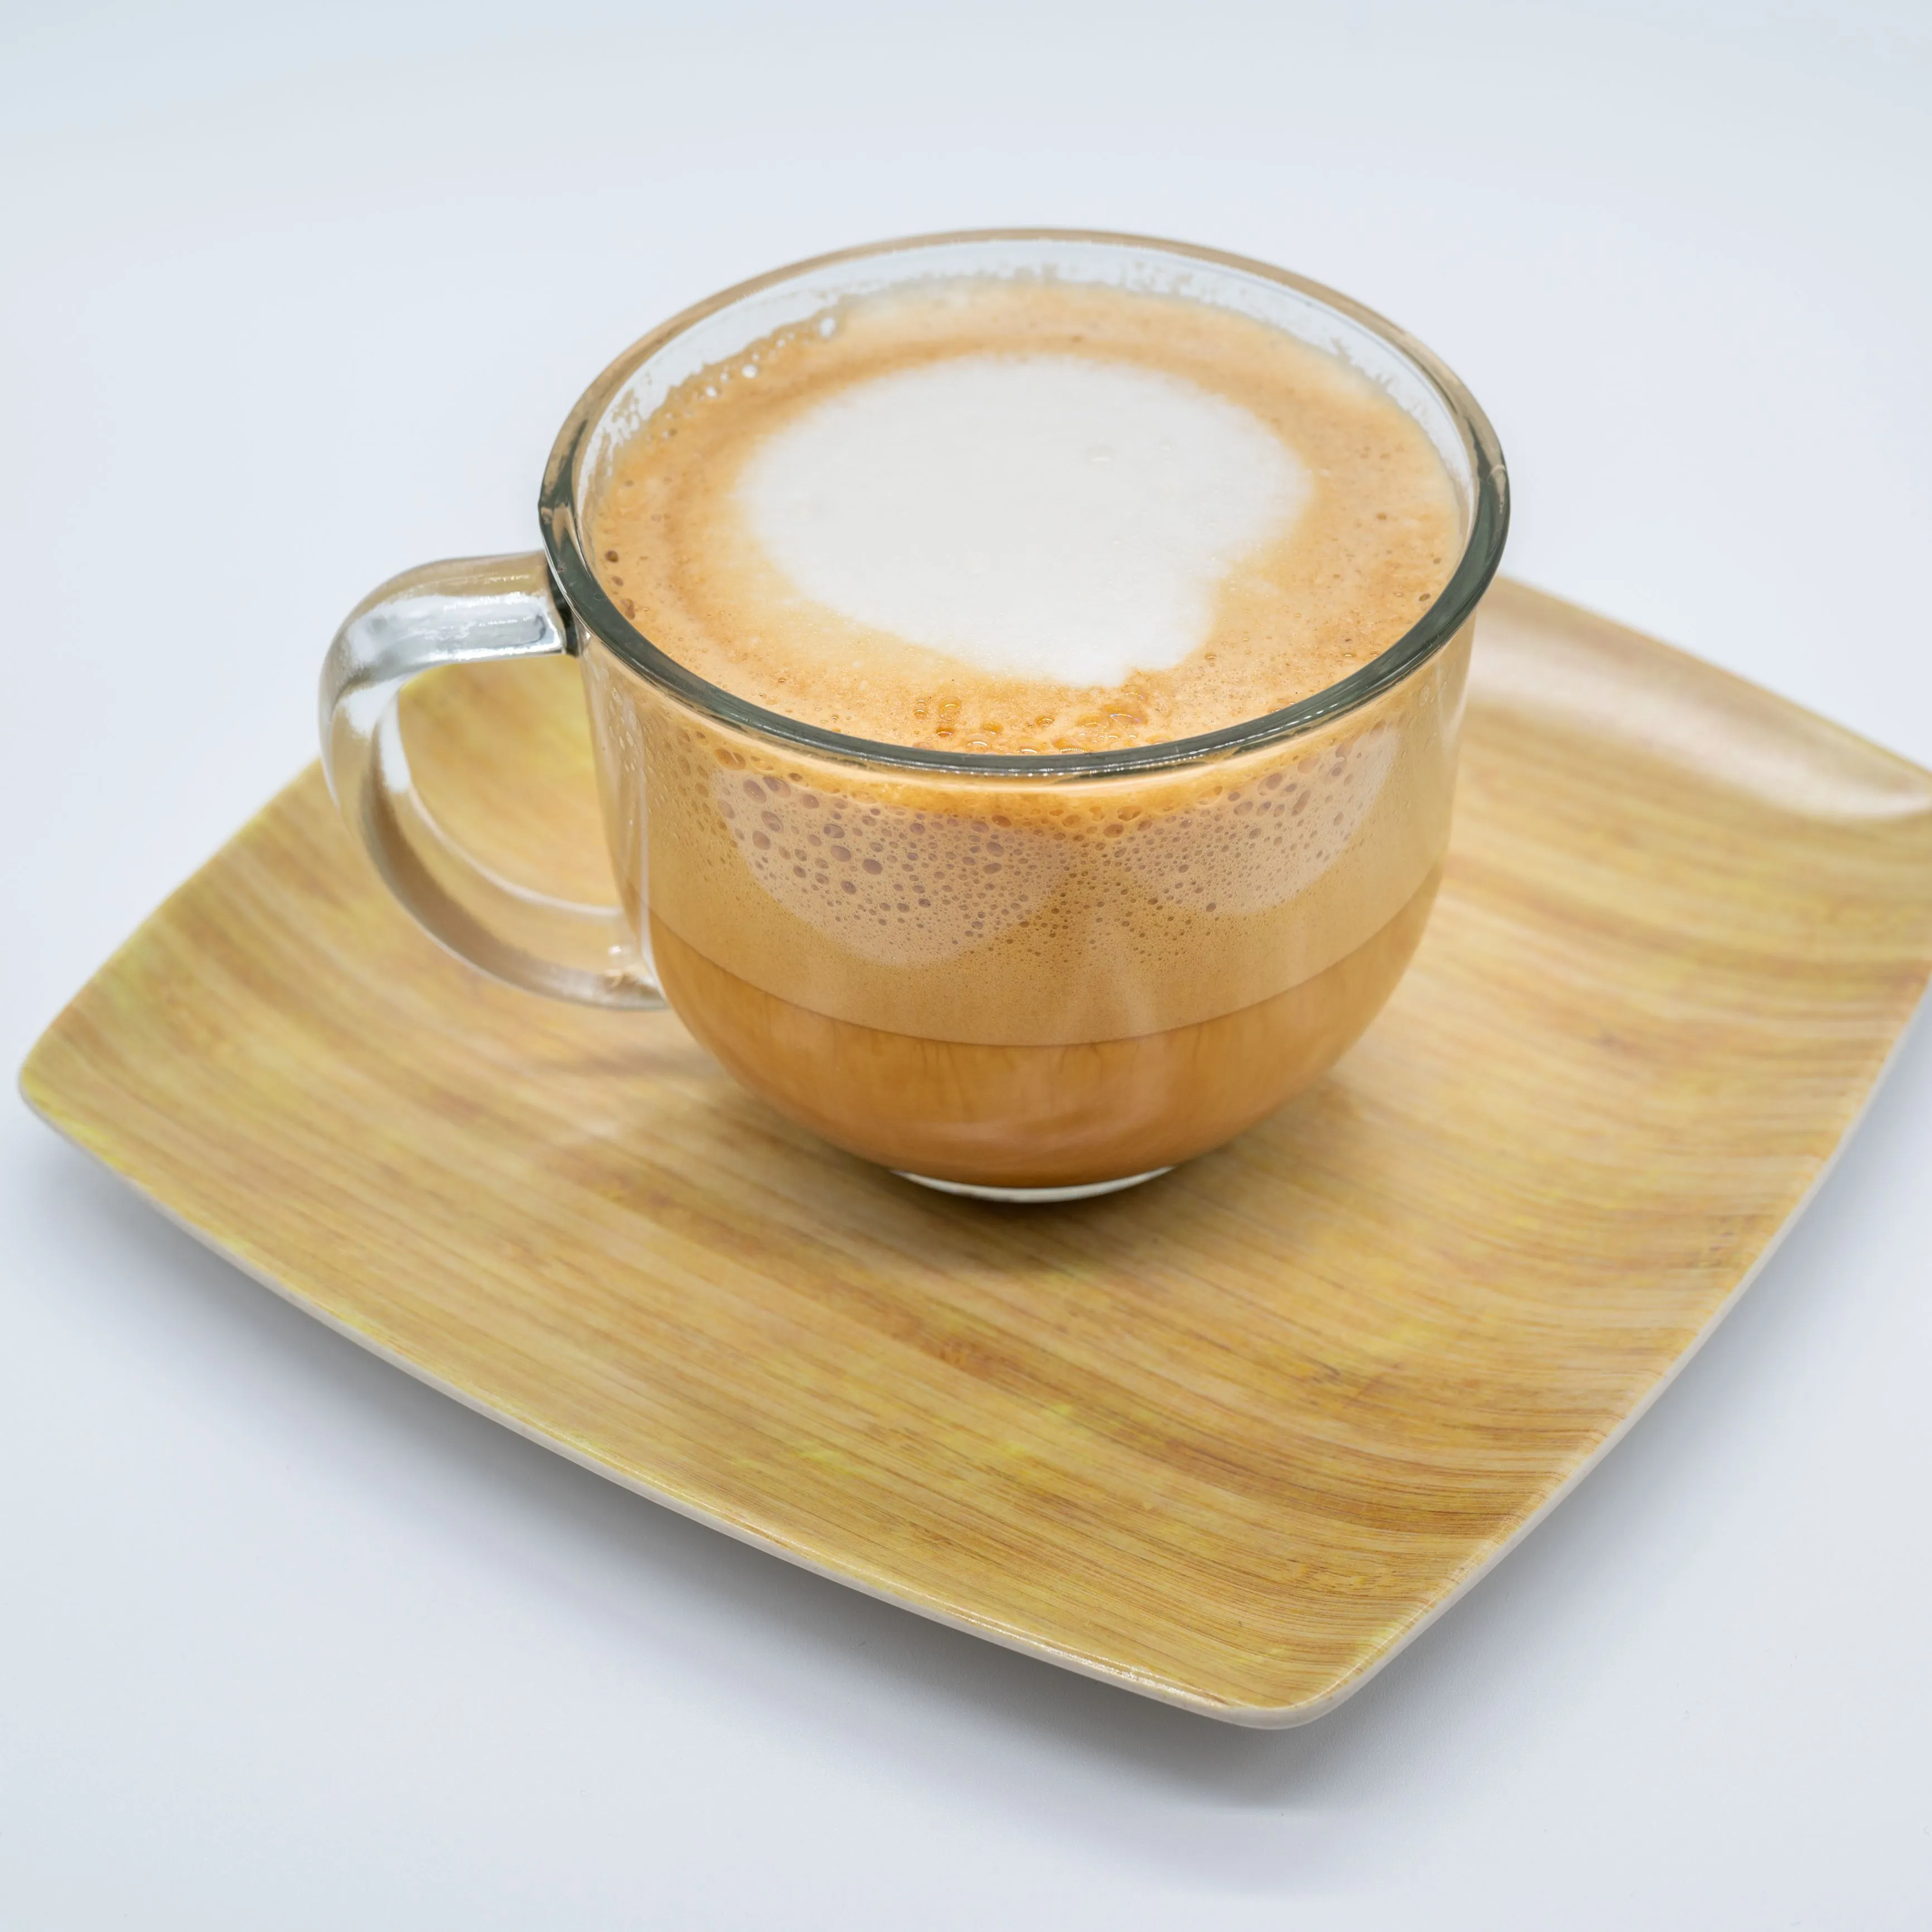 A cup of cappuccino with frothy milk on top, on a bamboo plate against a white background.